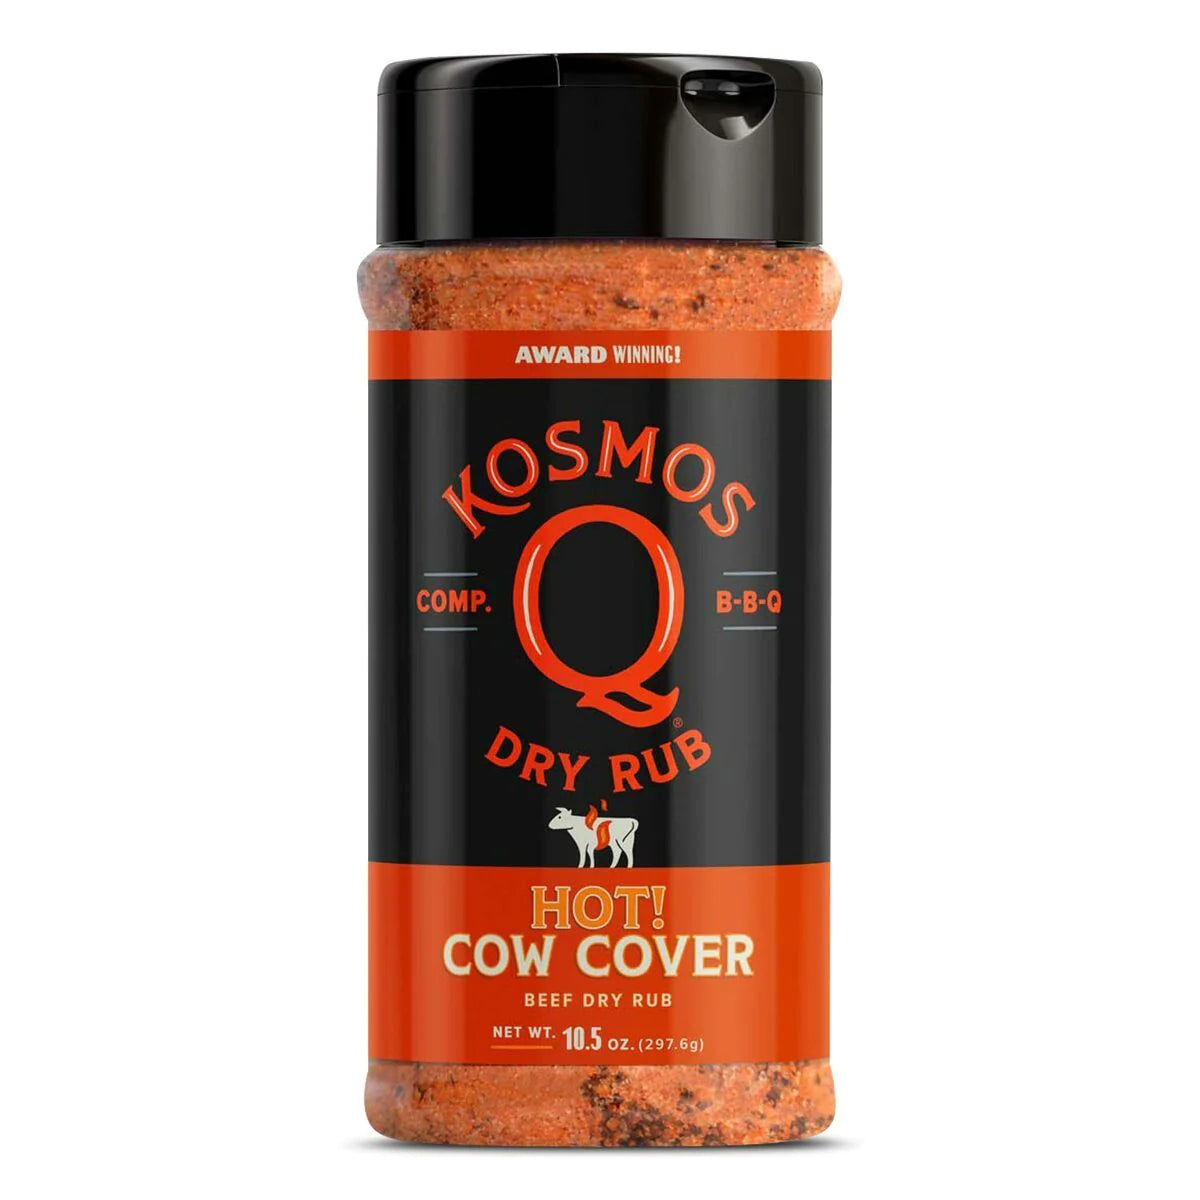 Cow Cover Hot